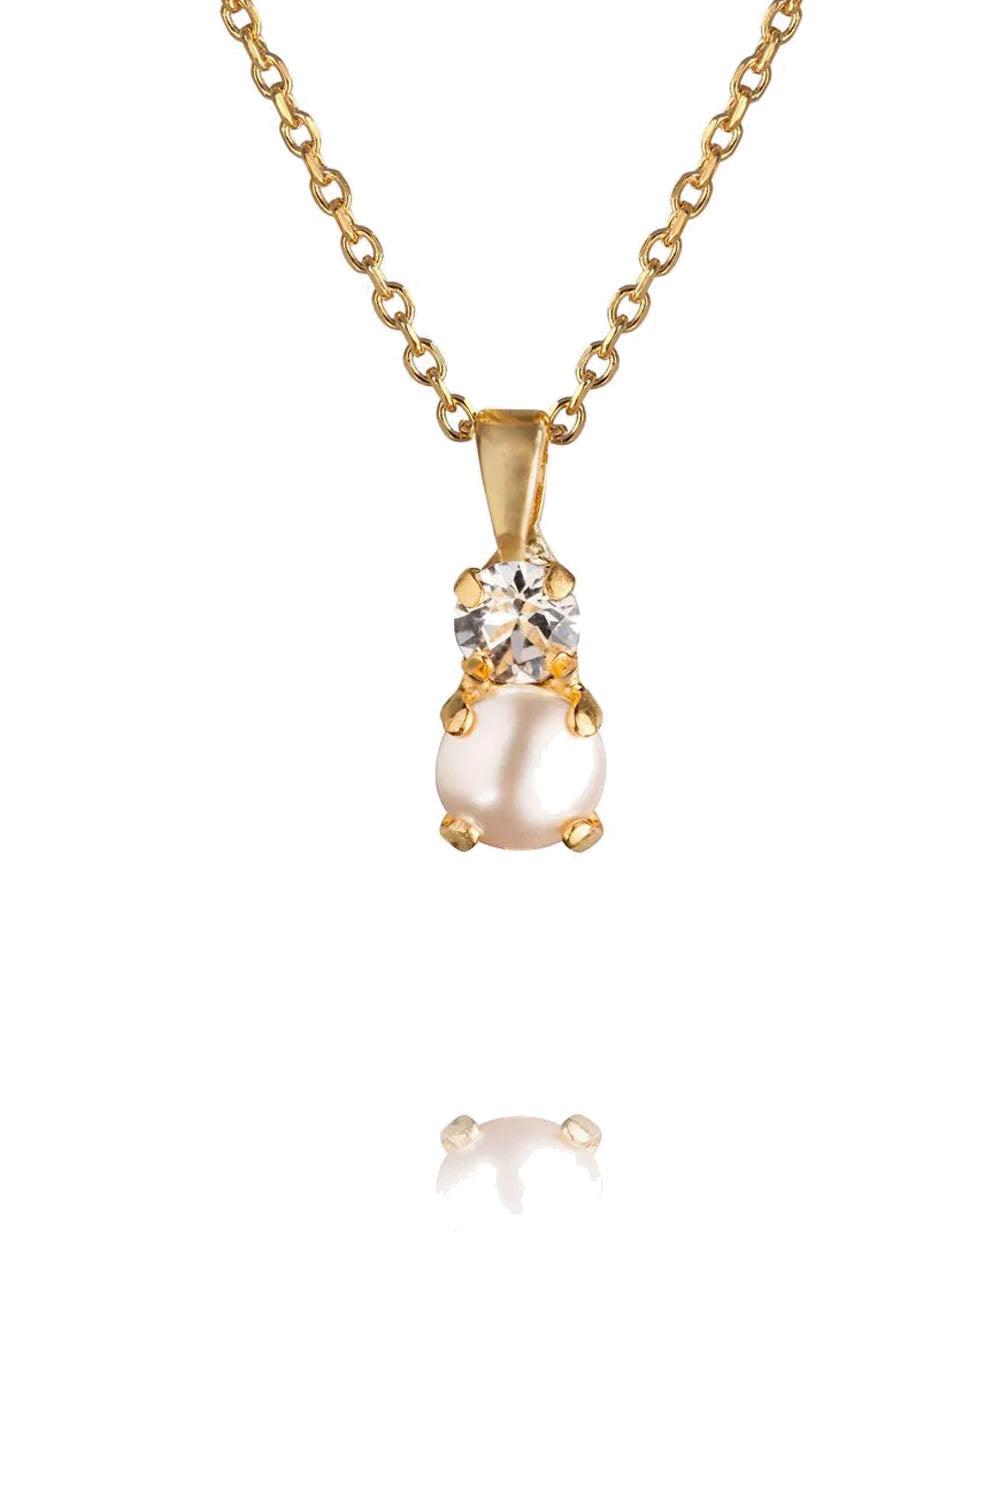 Girls Love Pearl Necklace Gold Pearl/Crystal